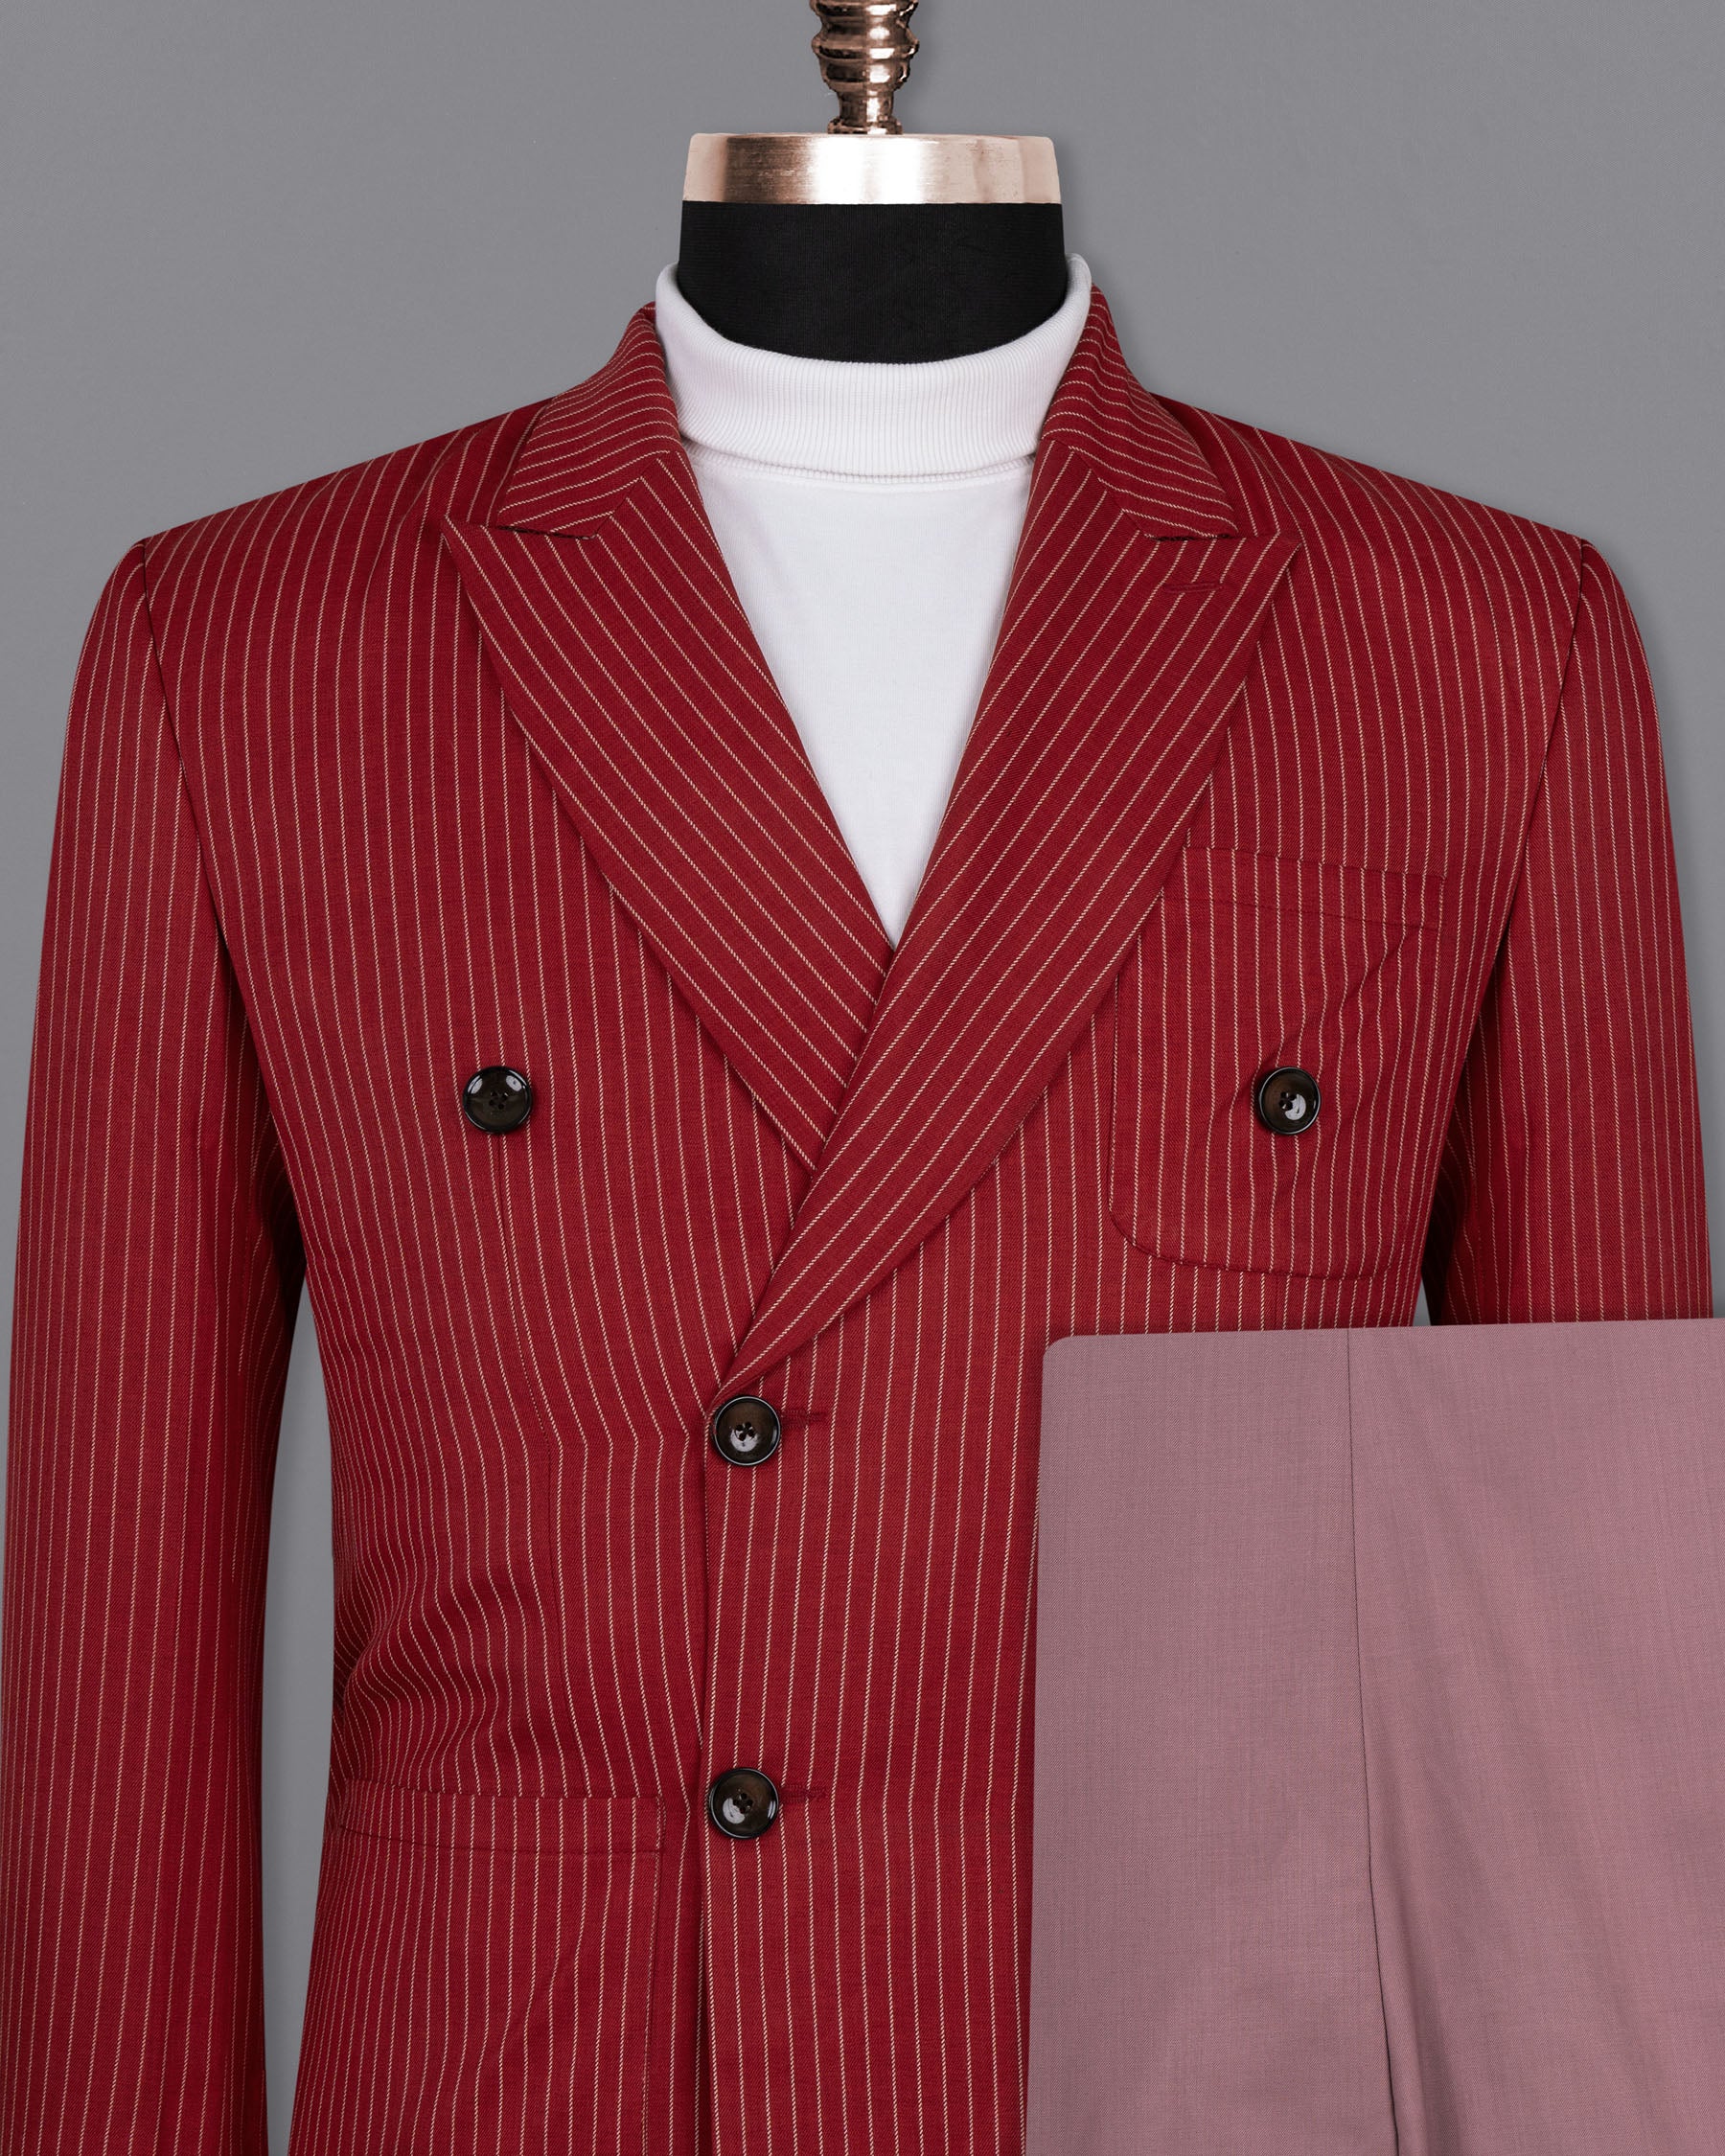 Merlot Red Striped Wool Rich DouSTe-Breasted Sports Suit ST1506-DB-PP-36, ST1506-DB-PP-38, ST1506-DB-PP-40, ST1506-DB-PP-42, ST1506-DB-PP-44, ST1506-DB-PP-46, ST1506-DB-PP-48, ST1506-DB-PP-50, ST1506-DB-PP-52, ST1506-DB-PP-54, ST1506-DB-PP-56, ST1506-DB-PP-58, ST1506-DB-PP-60